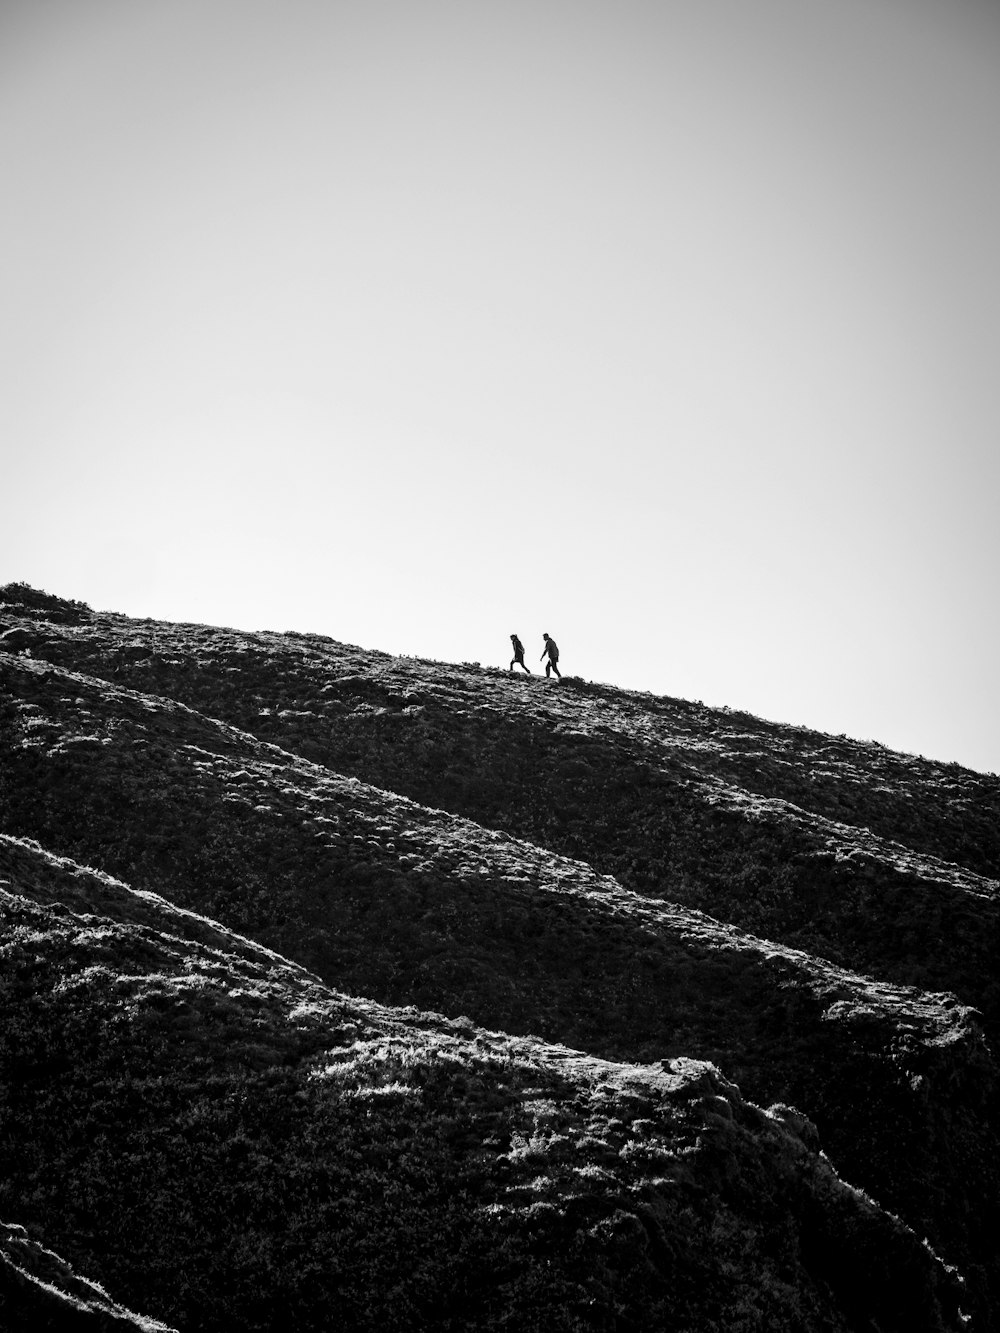 grayscale photo of person walking on hill